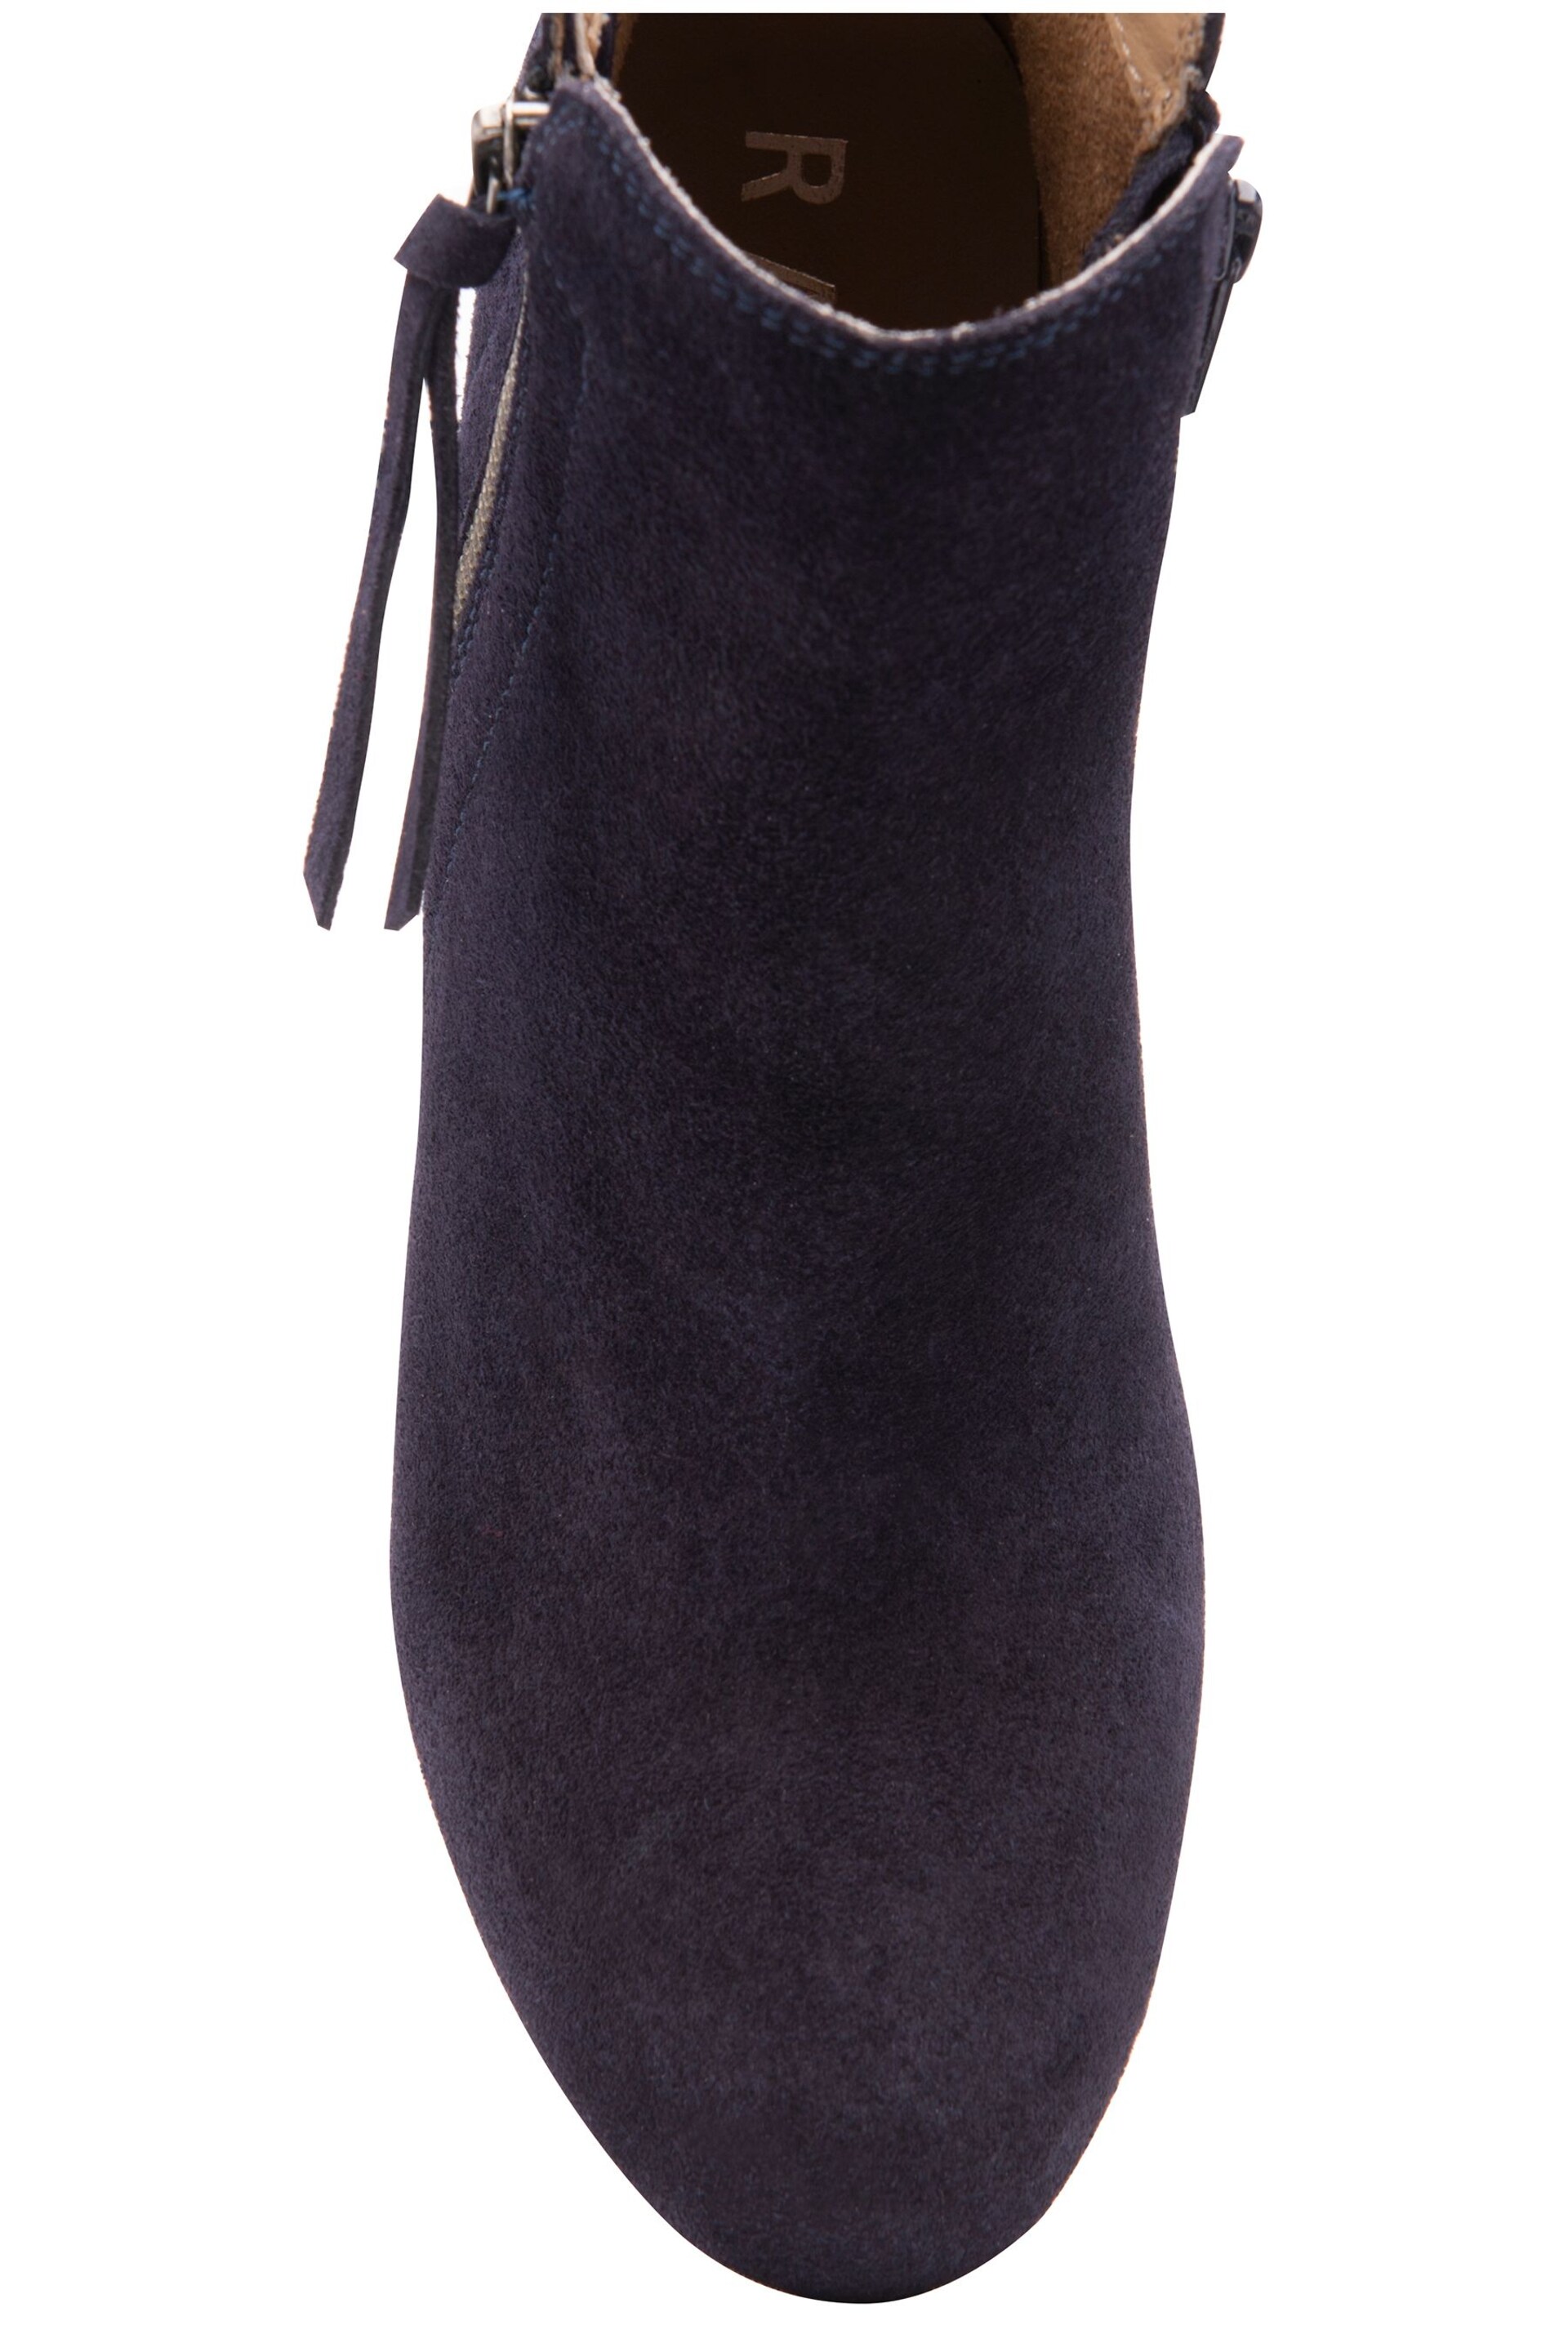 Ravel Blue Suede Leather Block Heel Ankle Boots - Image 4 of 4